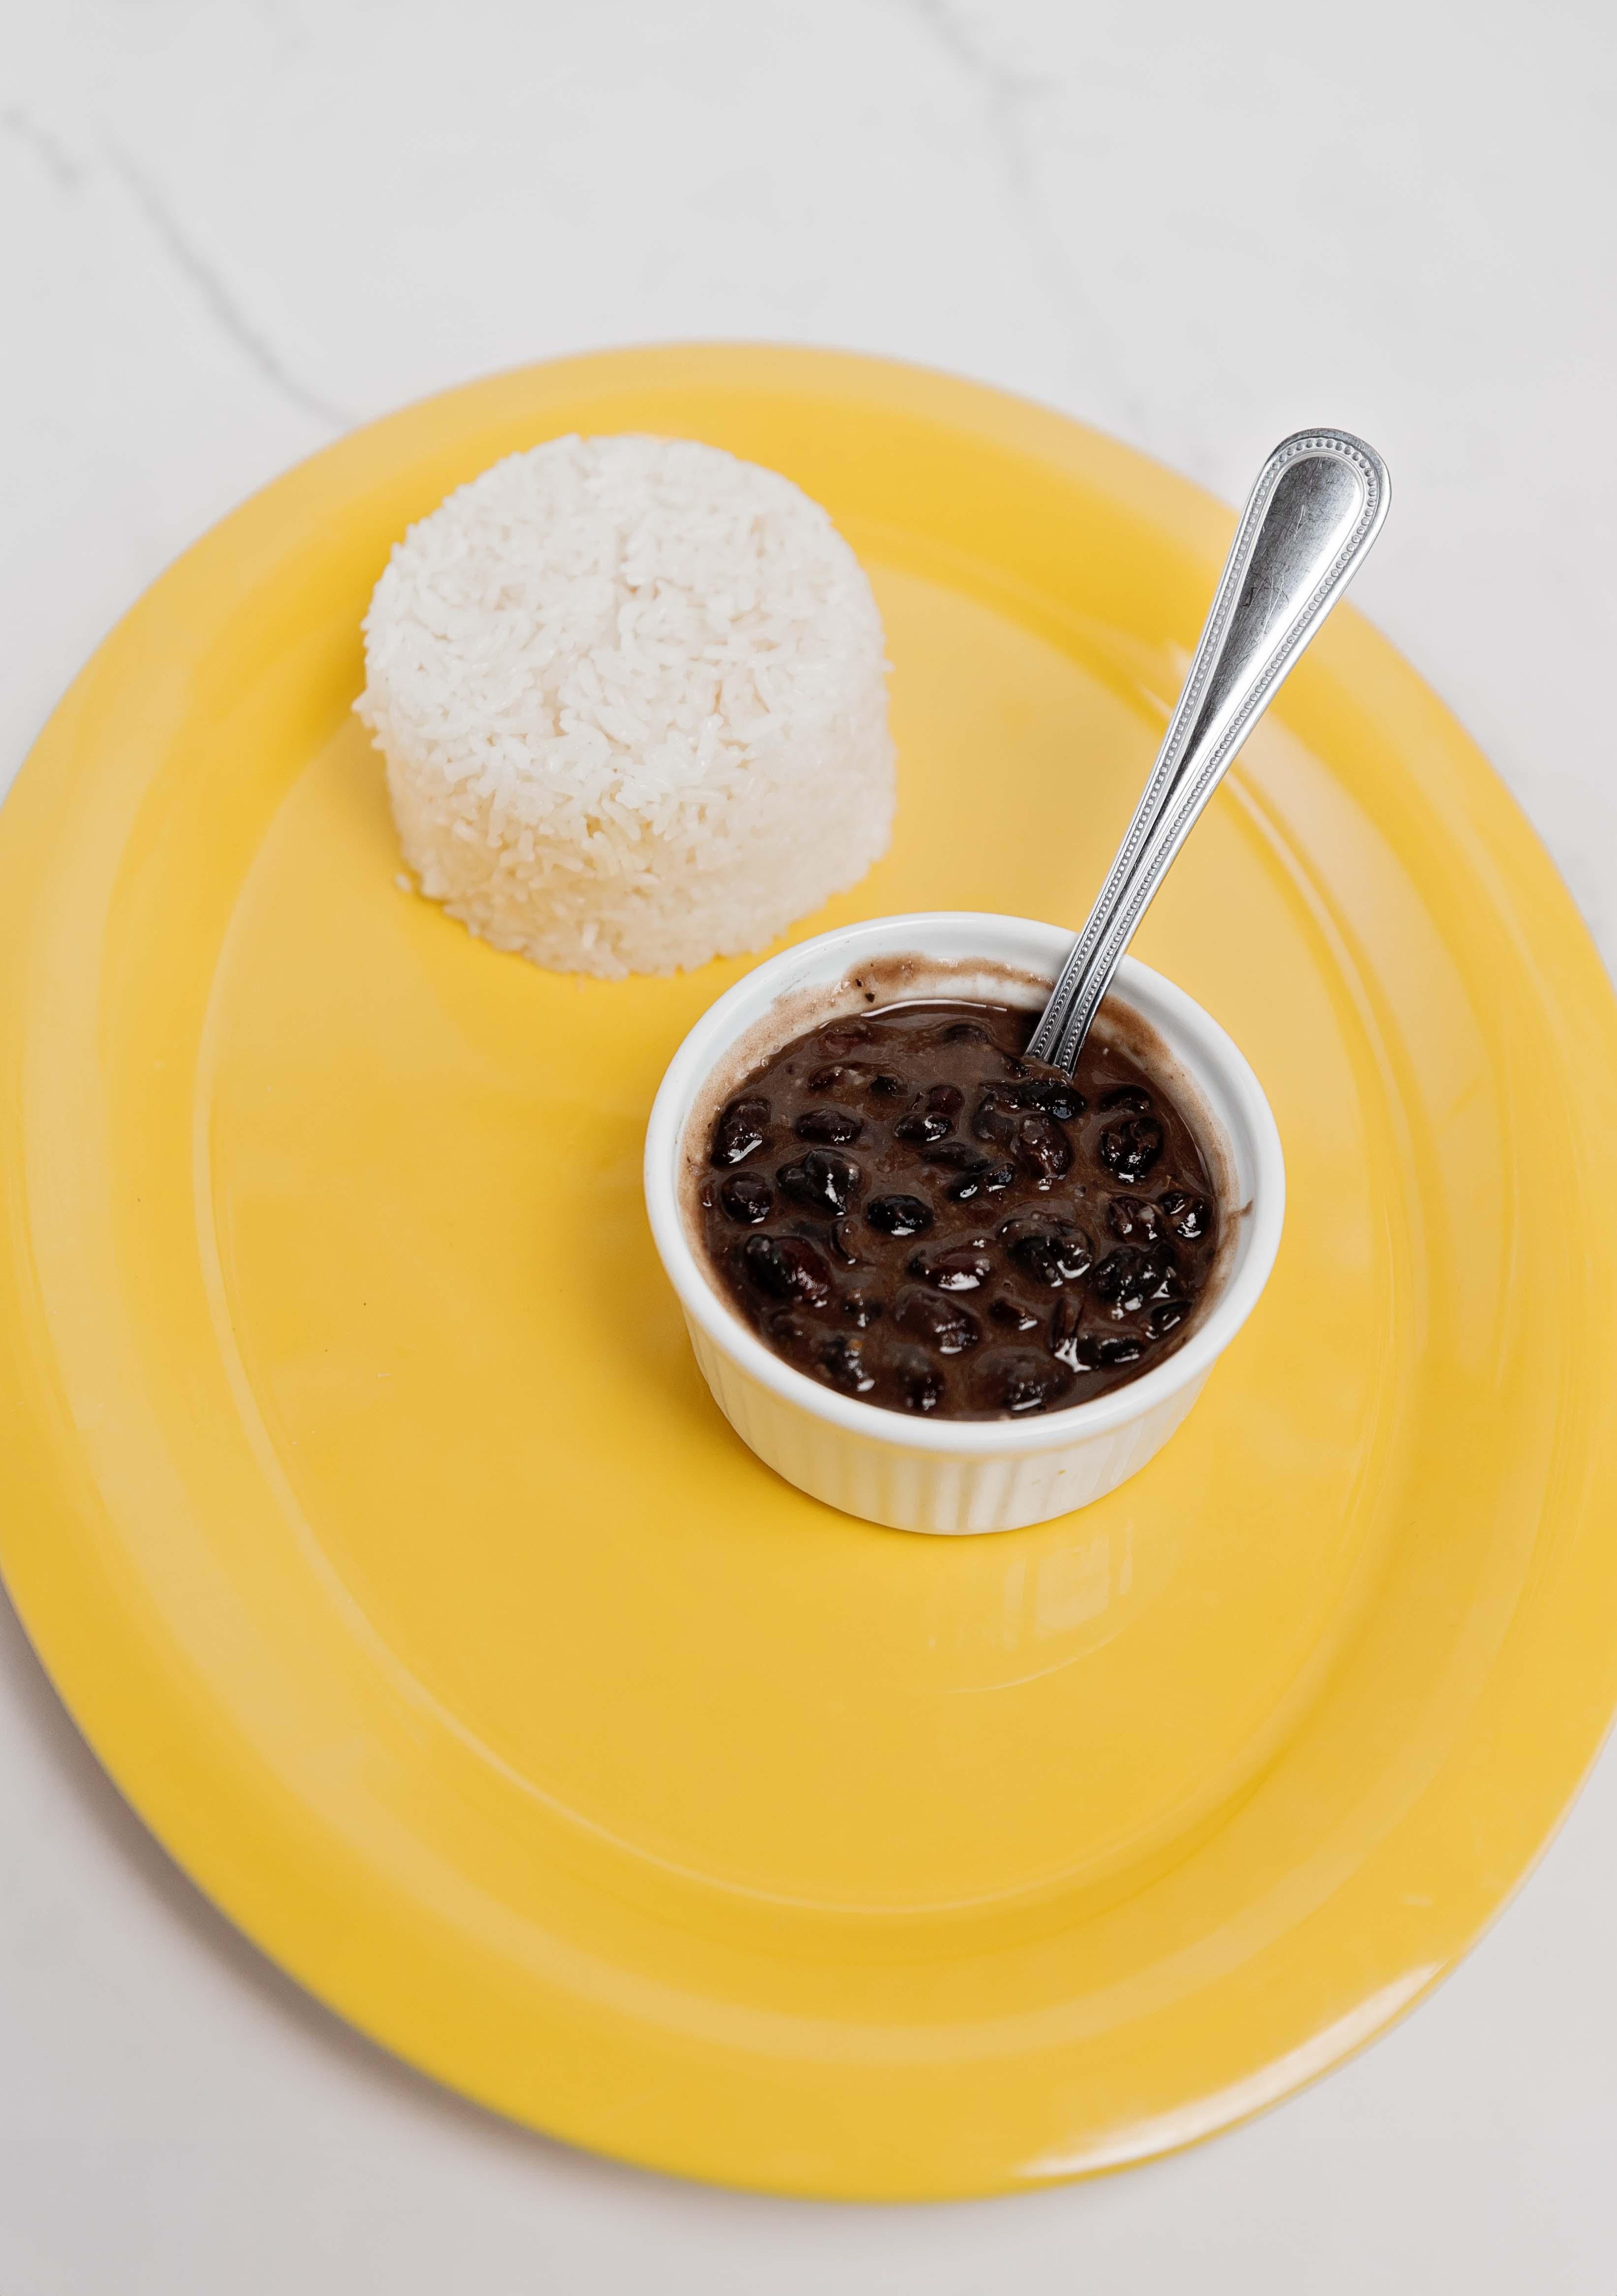 White rice and black beans